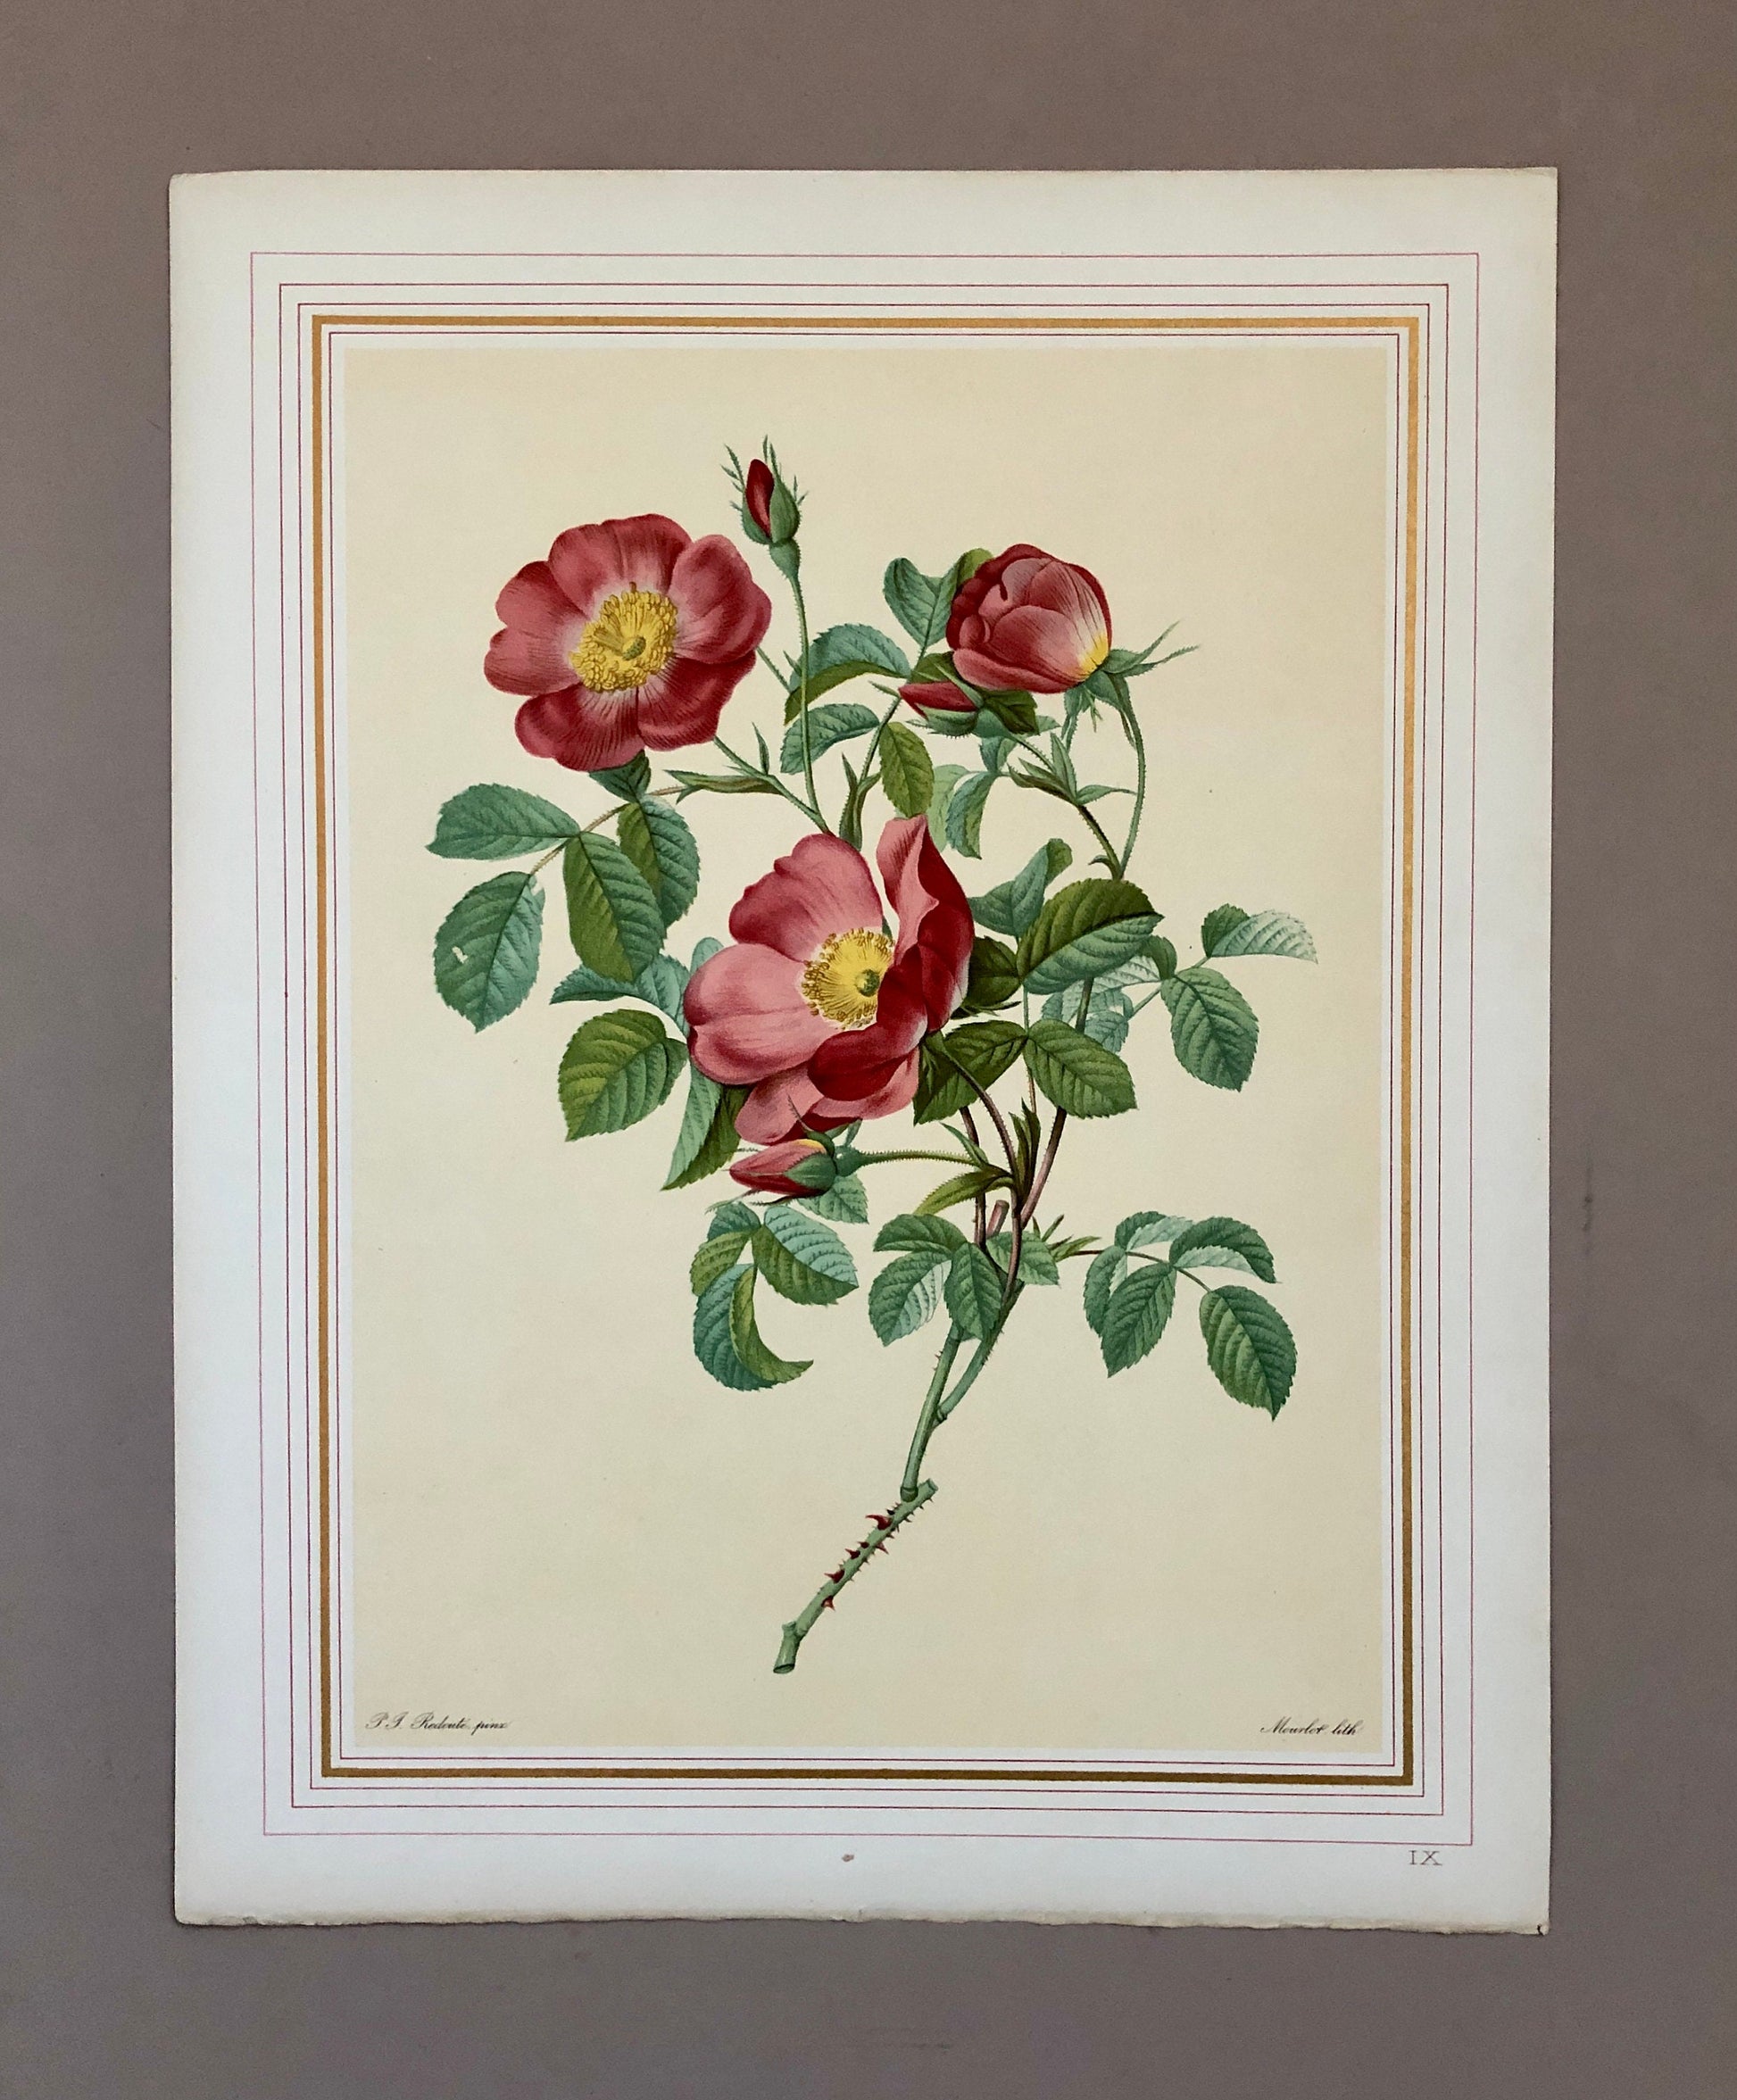 Ten Limited Edition Rose Prints from Choix Des Plus Belle Roses by P.-J. Redouté. Published in 1938. Excellent condition. Size: 41 x 32 ms.